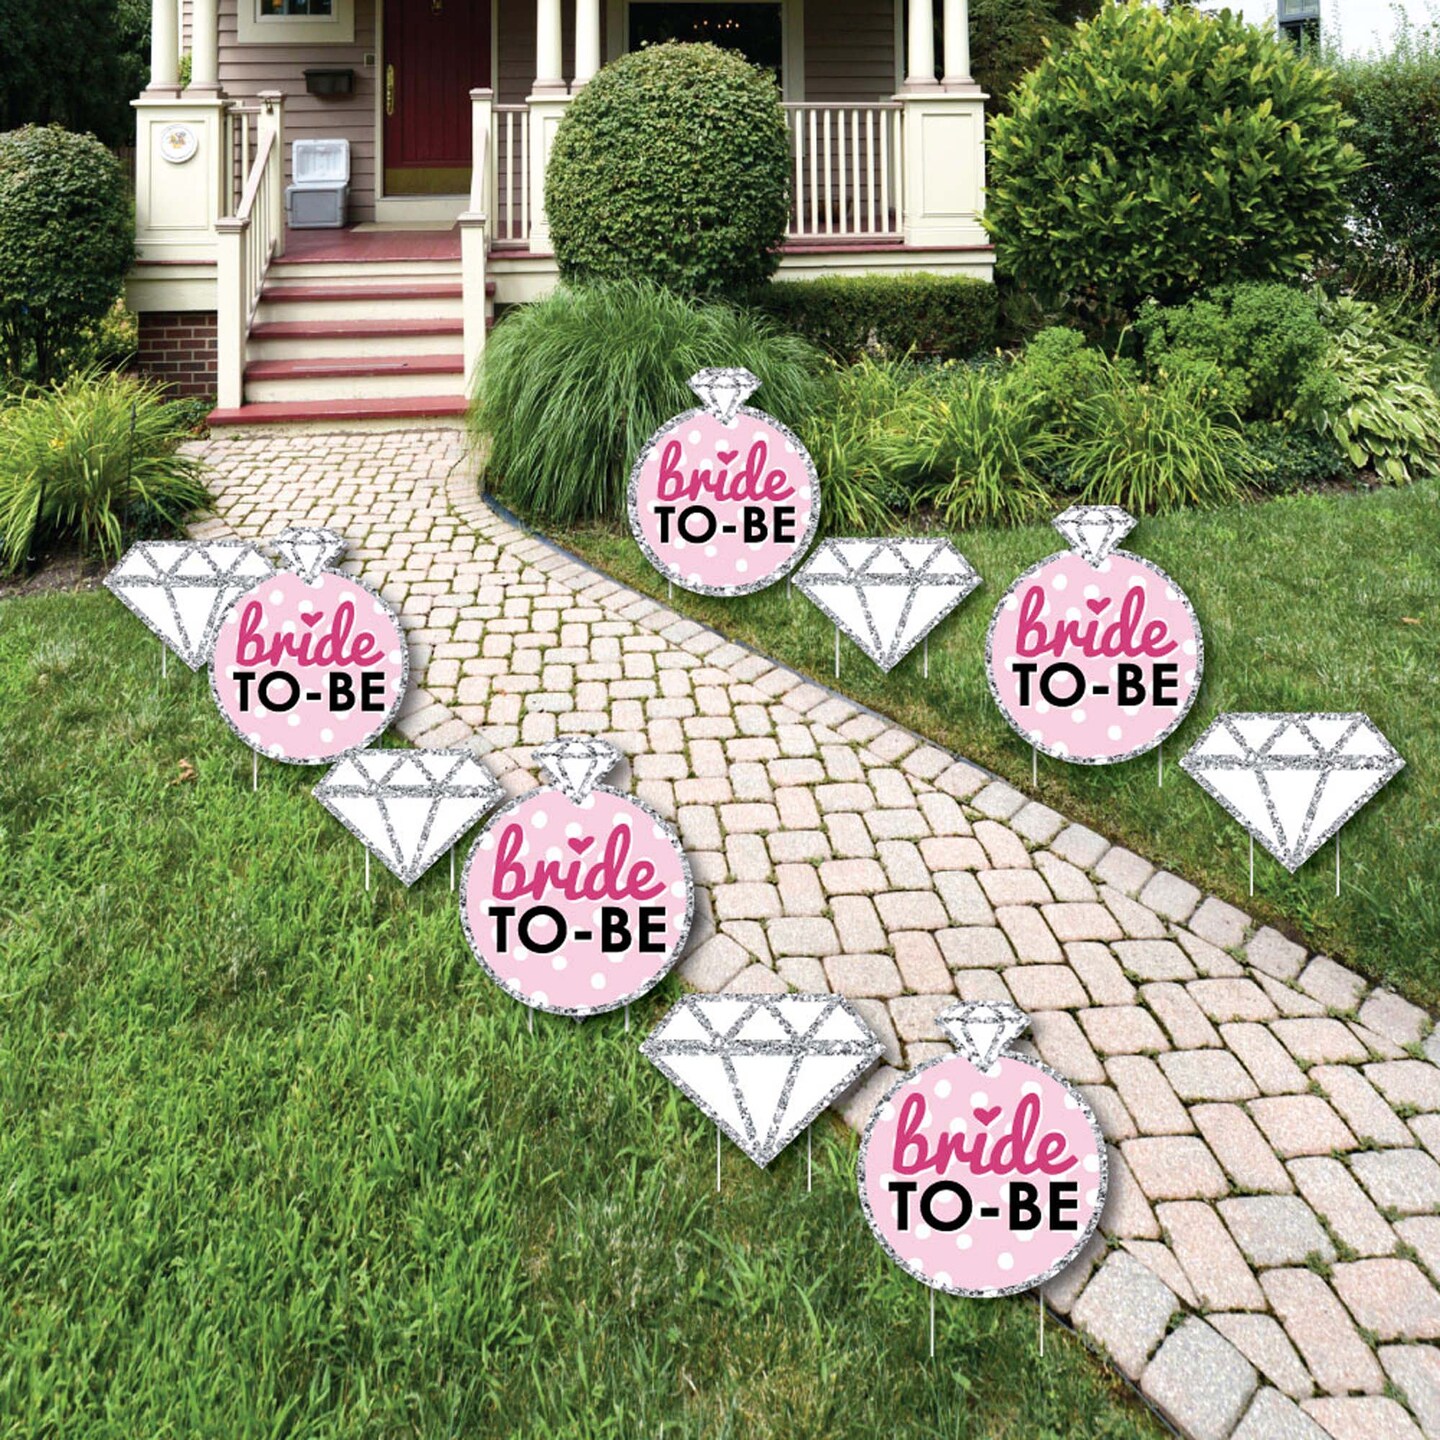 Big Dot of Happiness Bride-to-Be - Diamond Ring Lawn Decorations - Outdoor Classy Bachelorette Party or Bridal Shower Yard Decorations - 10 Piece